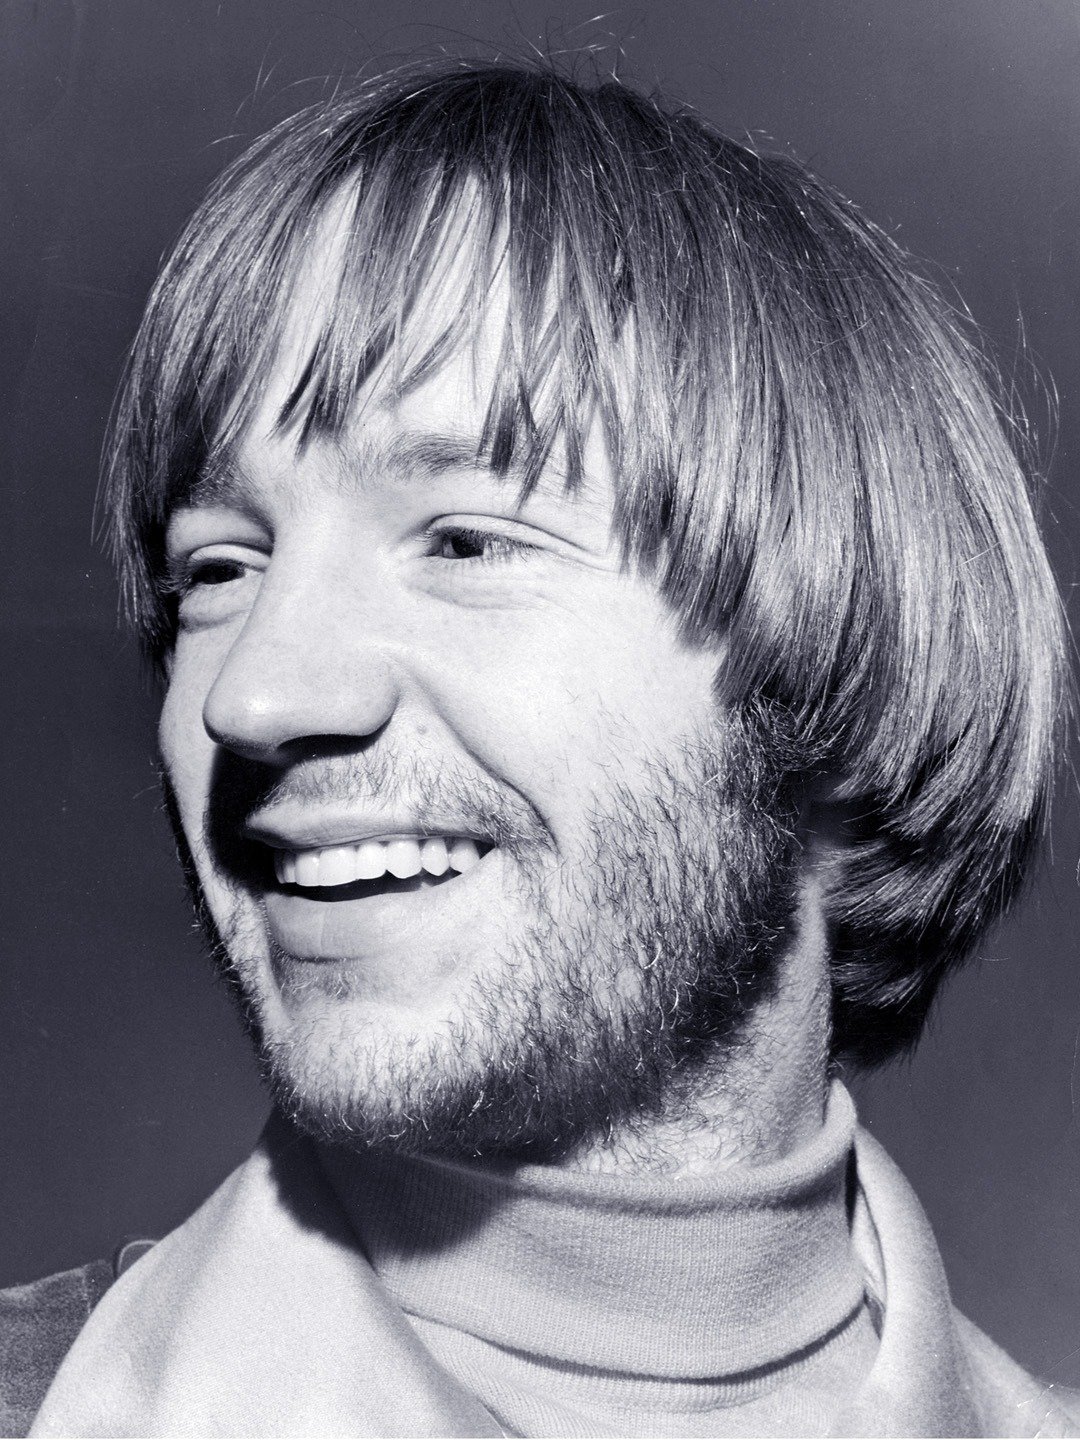 How tall is Peter Tork?